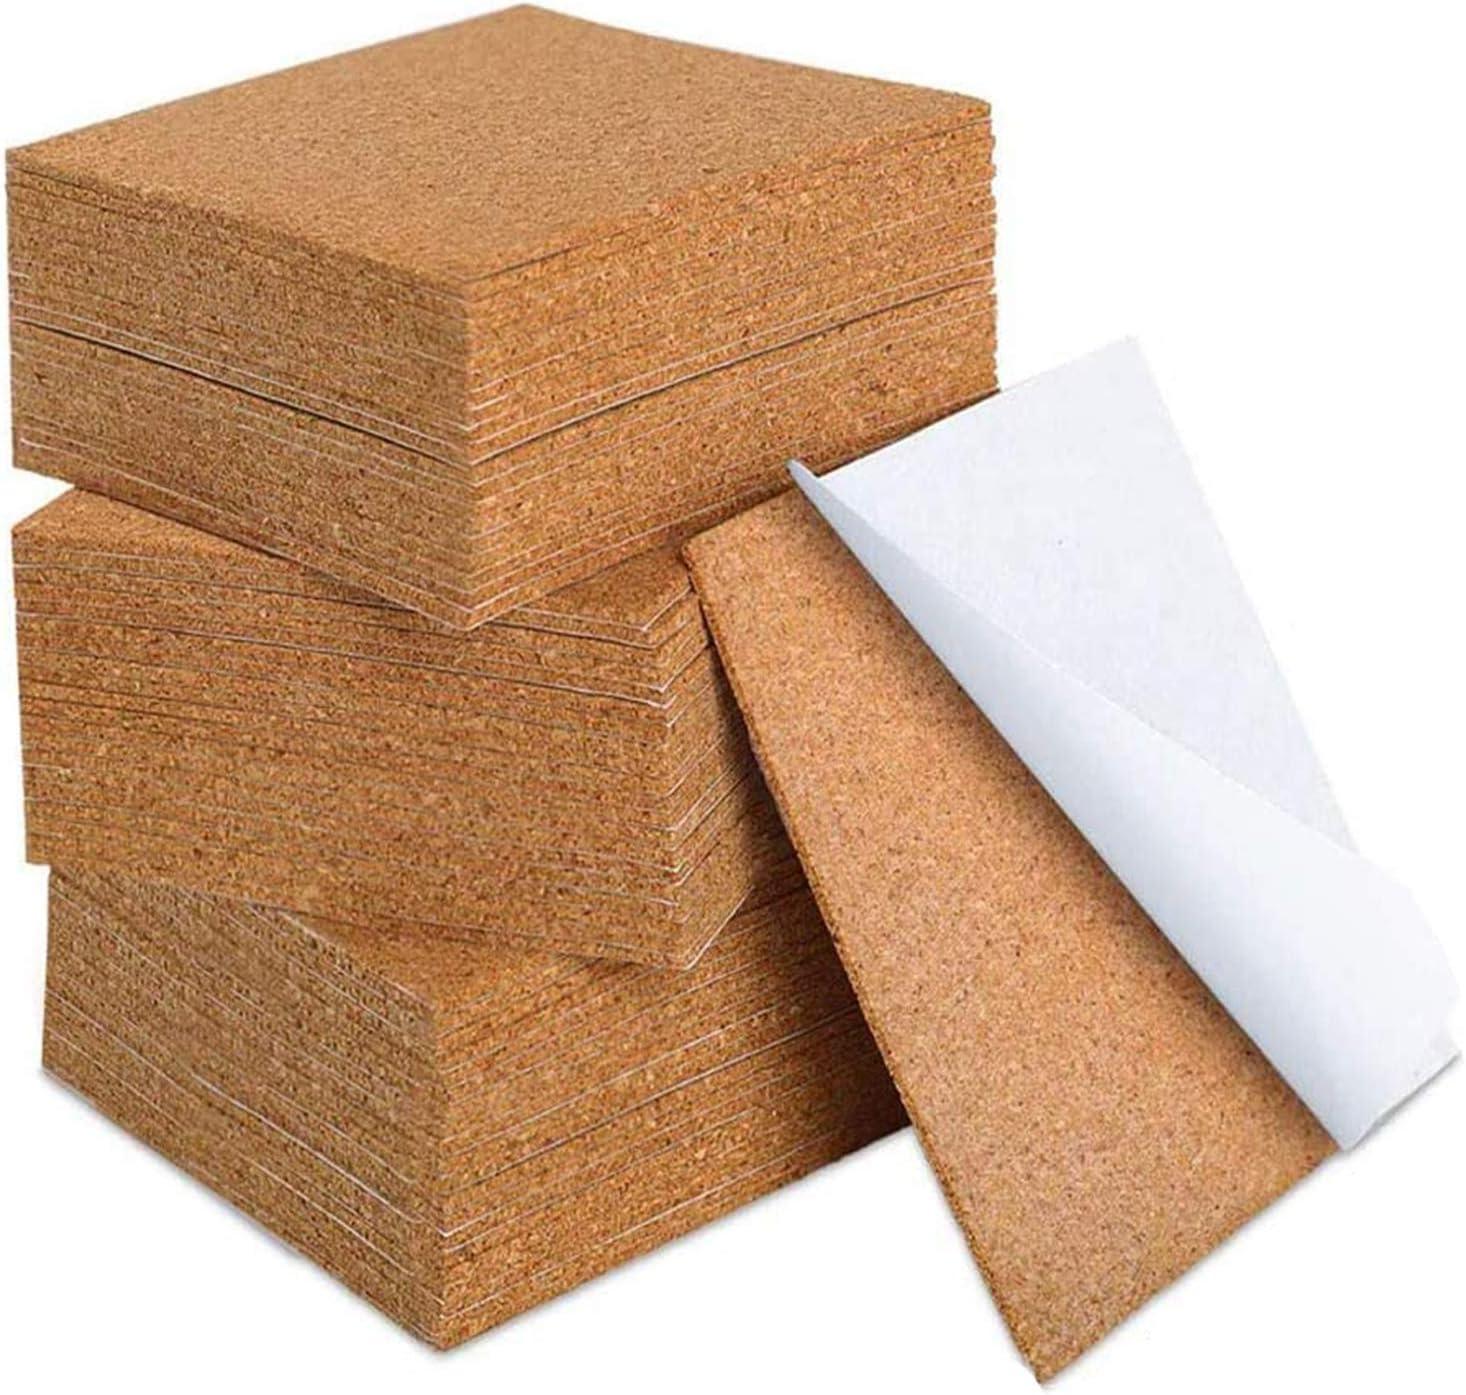 4 x 4 Inch Self Adhesive Cork Squares 100 MM Backing Cork Tiles Sheets for  Coasters and DIY Crafts, 40 Pcs.